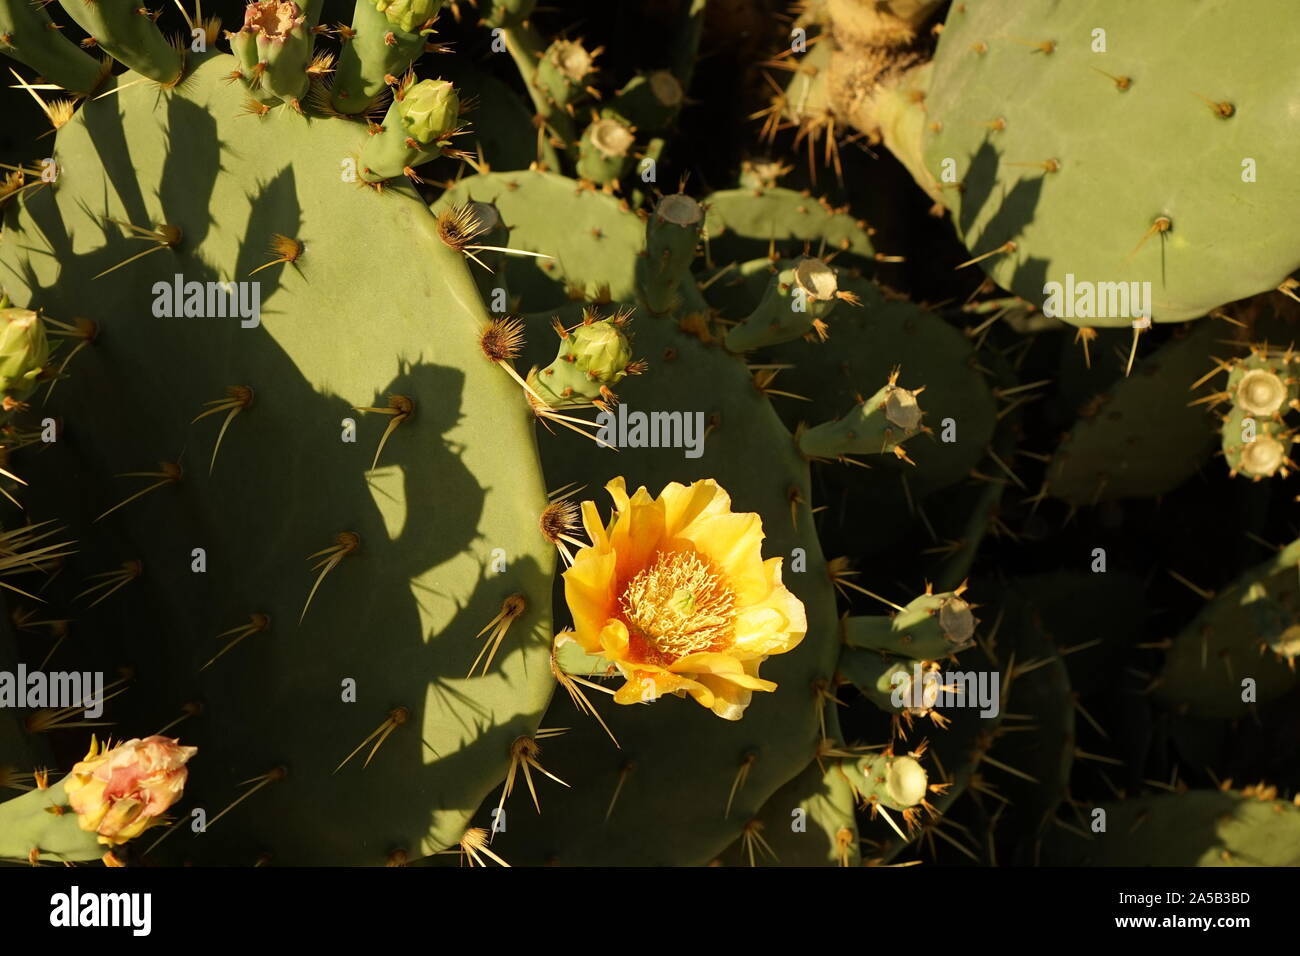 Cactus of Iberia, Prickly Pear with yellow flower Stock Photo